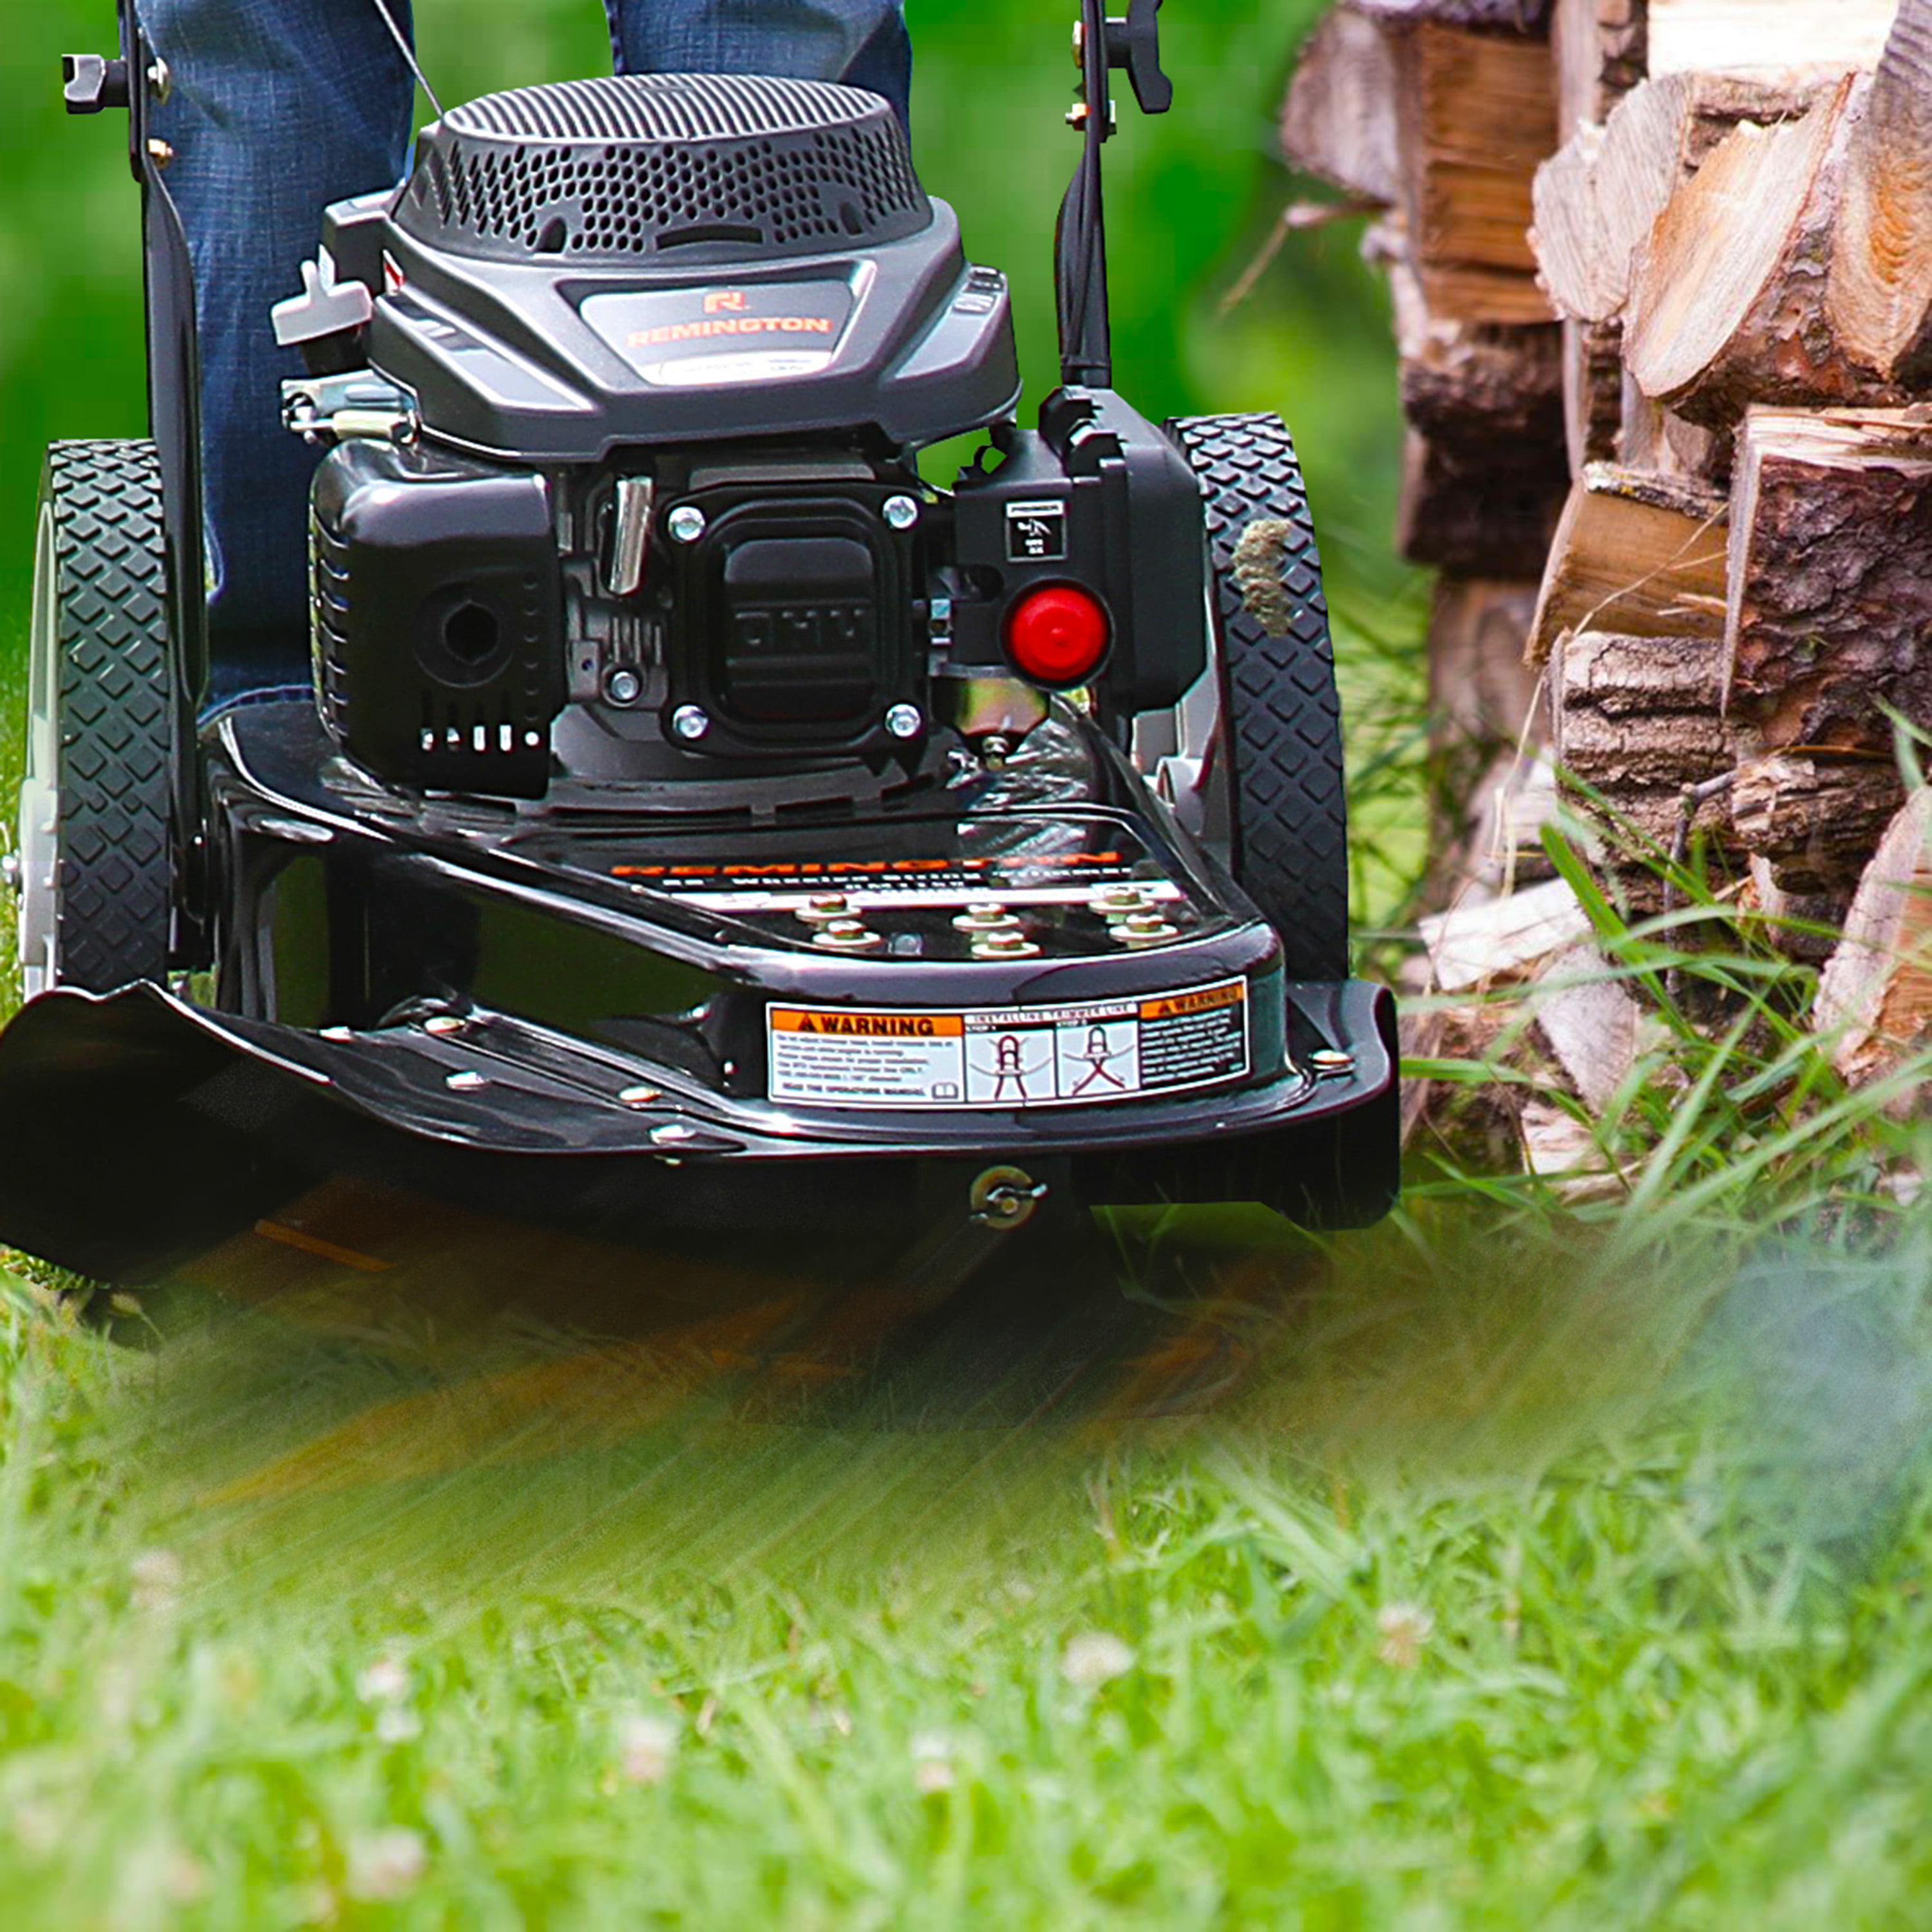 remington weed trimmer